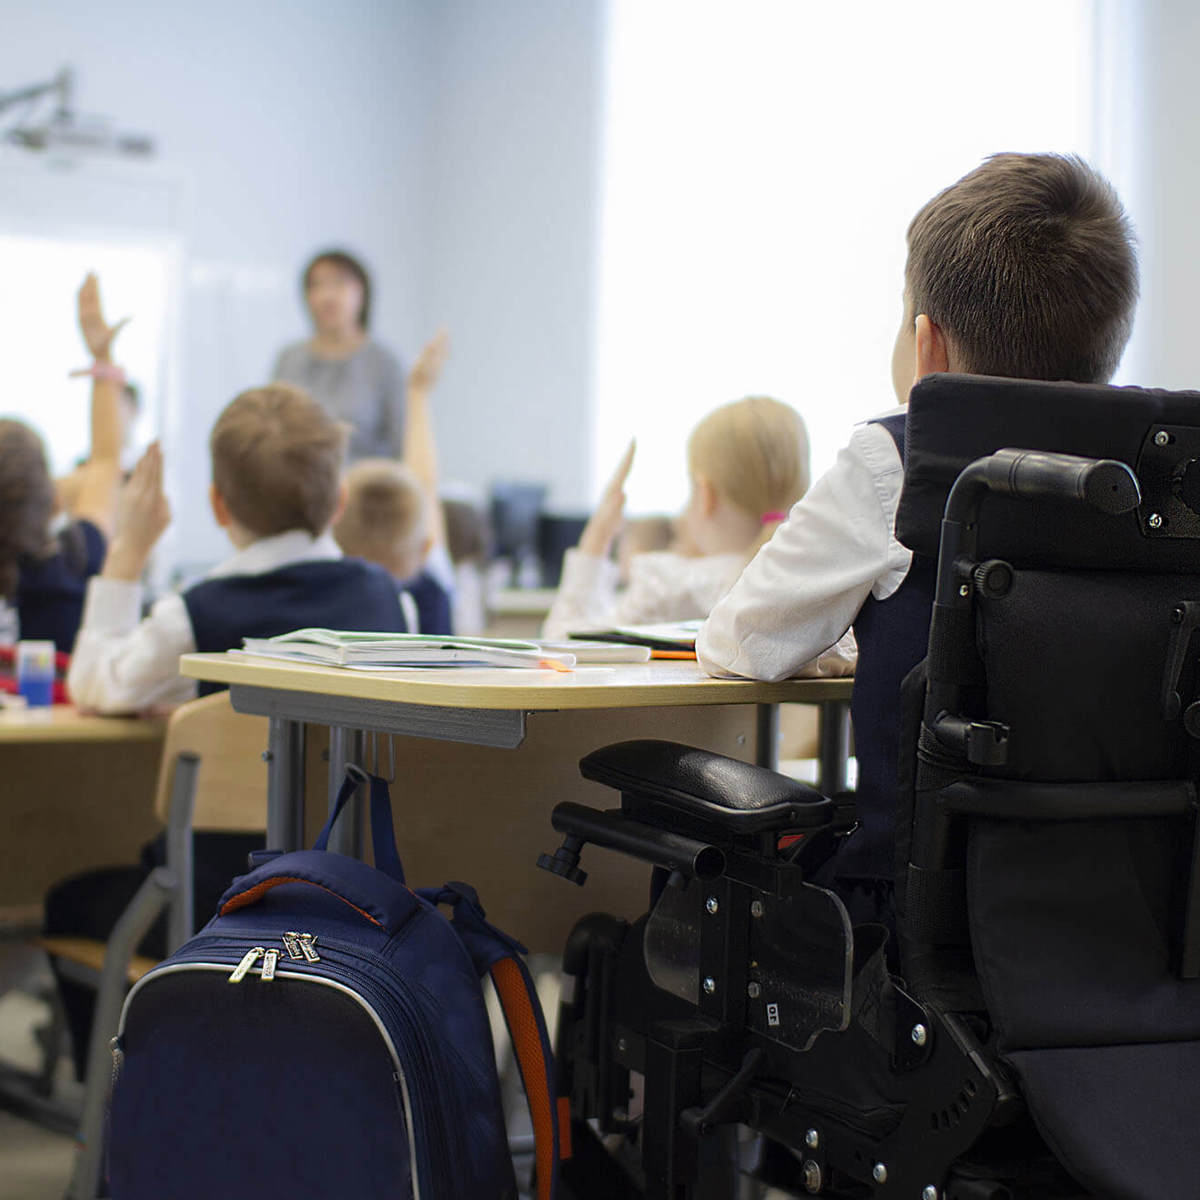 Pupils-learning blurred full classroom with a special educational needs and disabilities pupil learning